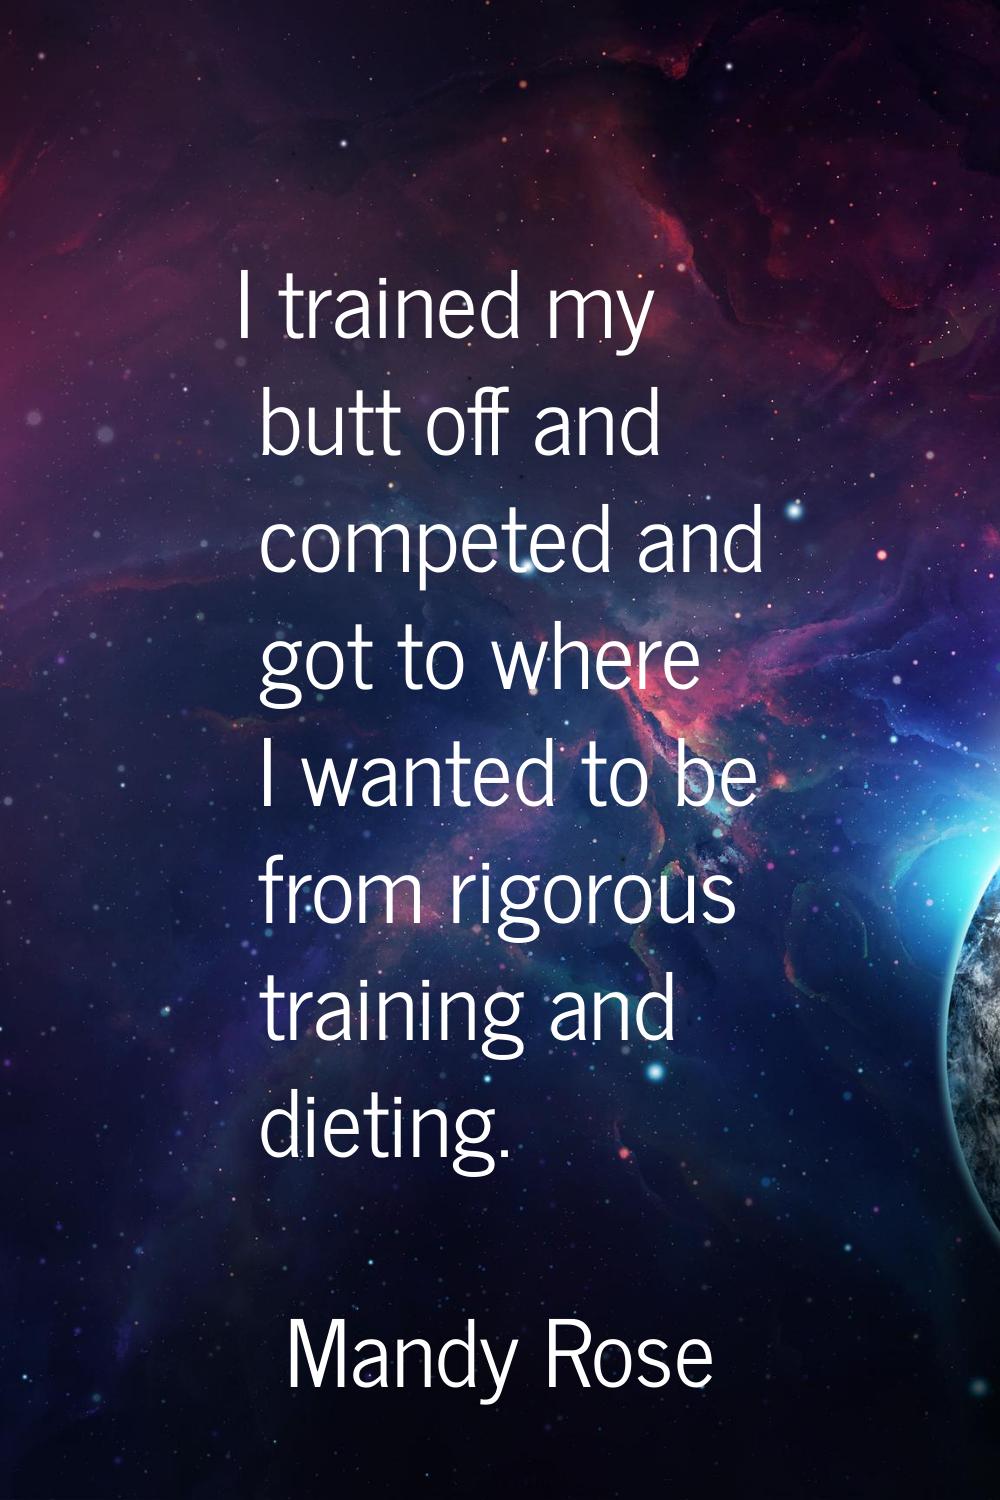 I trained my butt off and competed and got to where I wanted to be from rigorous training and dieti